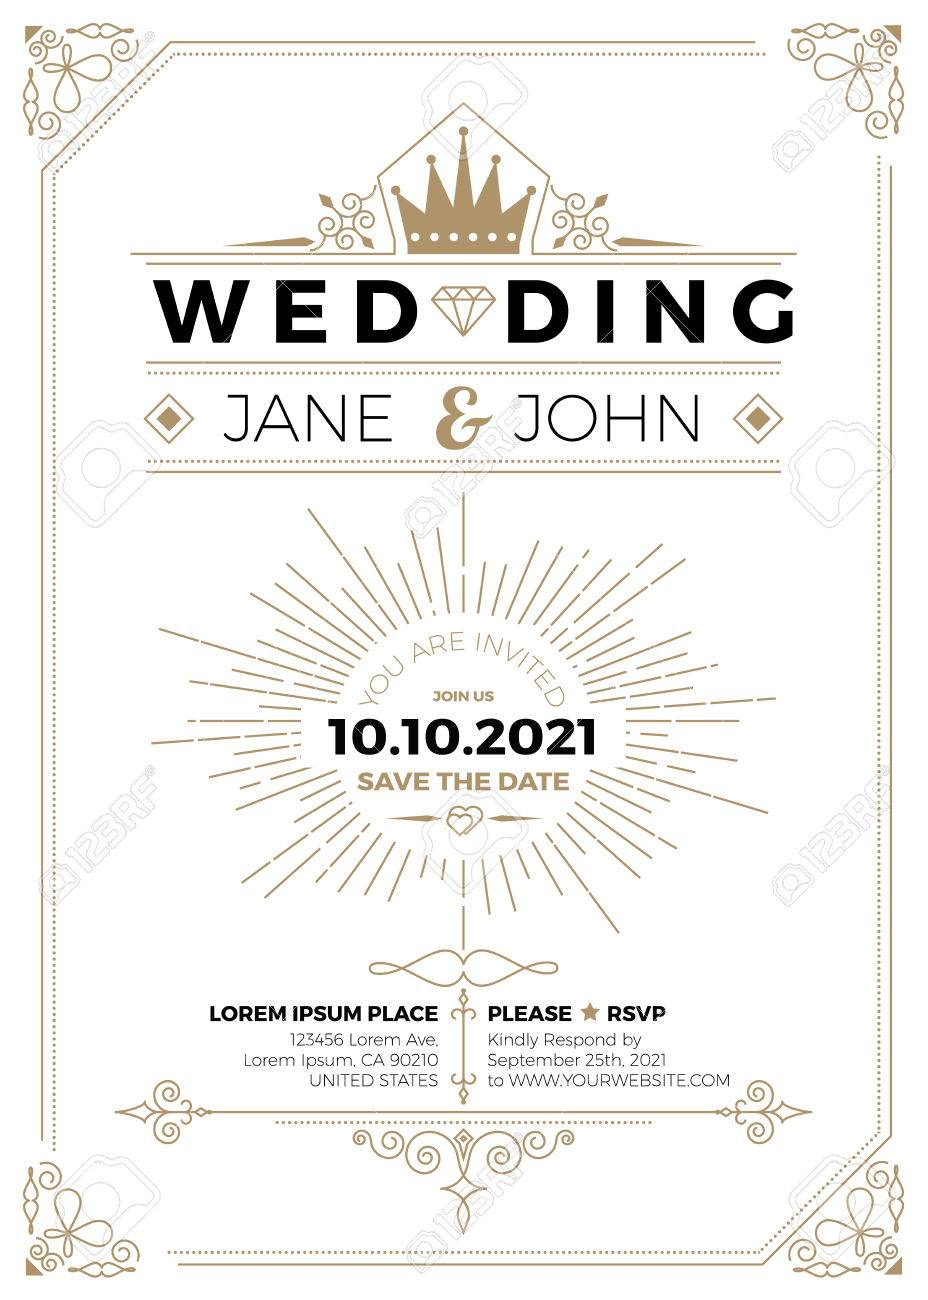 Vintage Wedding Invitation Card A5 Size Frame Layout Print Template Throughout Wedding Card Size Template